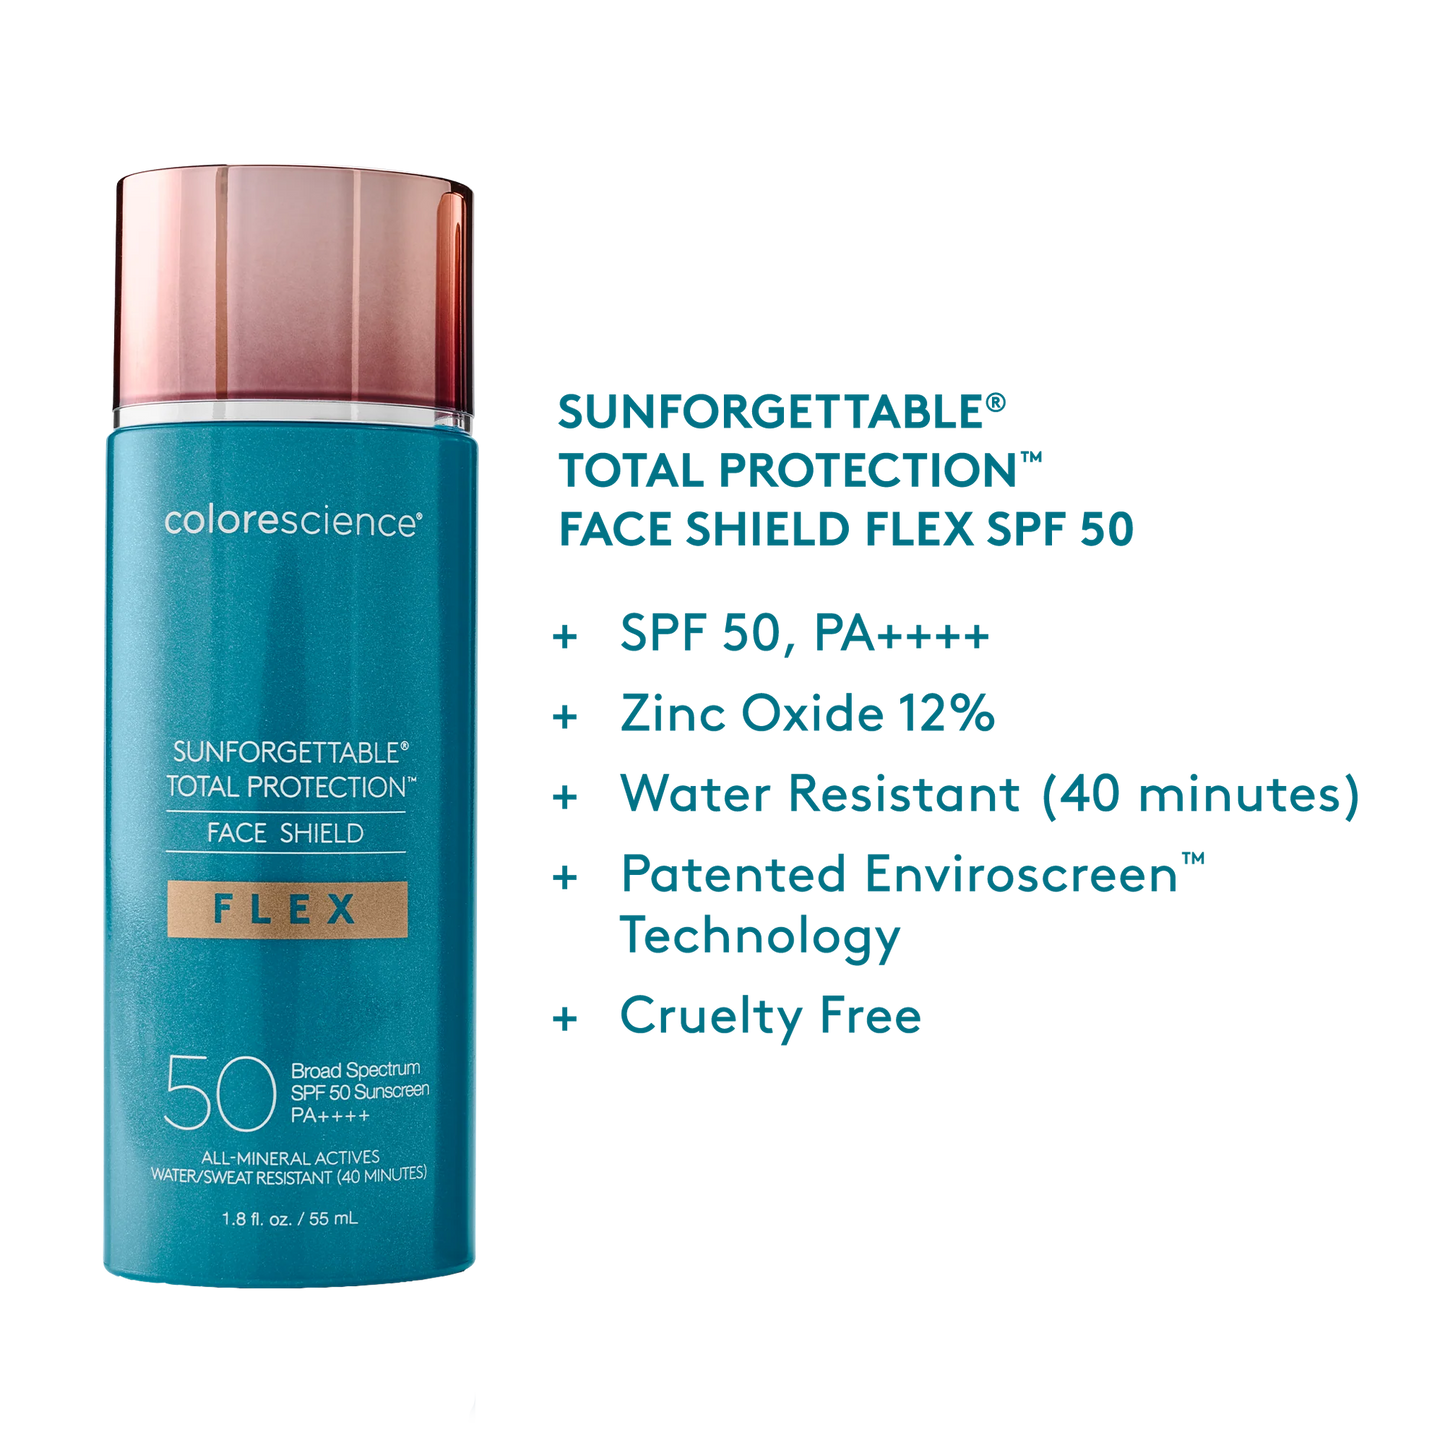 COLORES SCIENCE | SUNFORGETTABLE TOTAL PROTECTION FACE SHIELD FLEX SPF 50